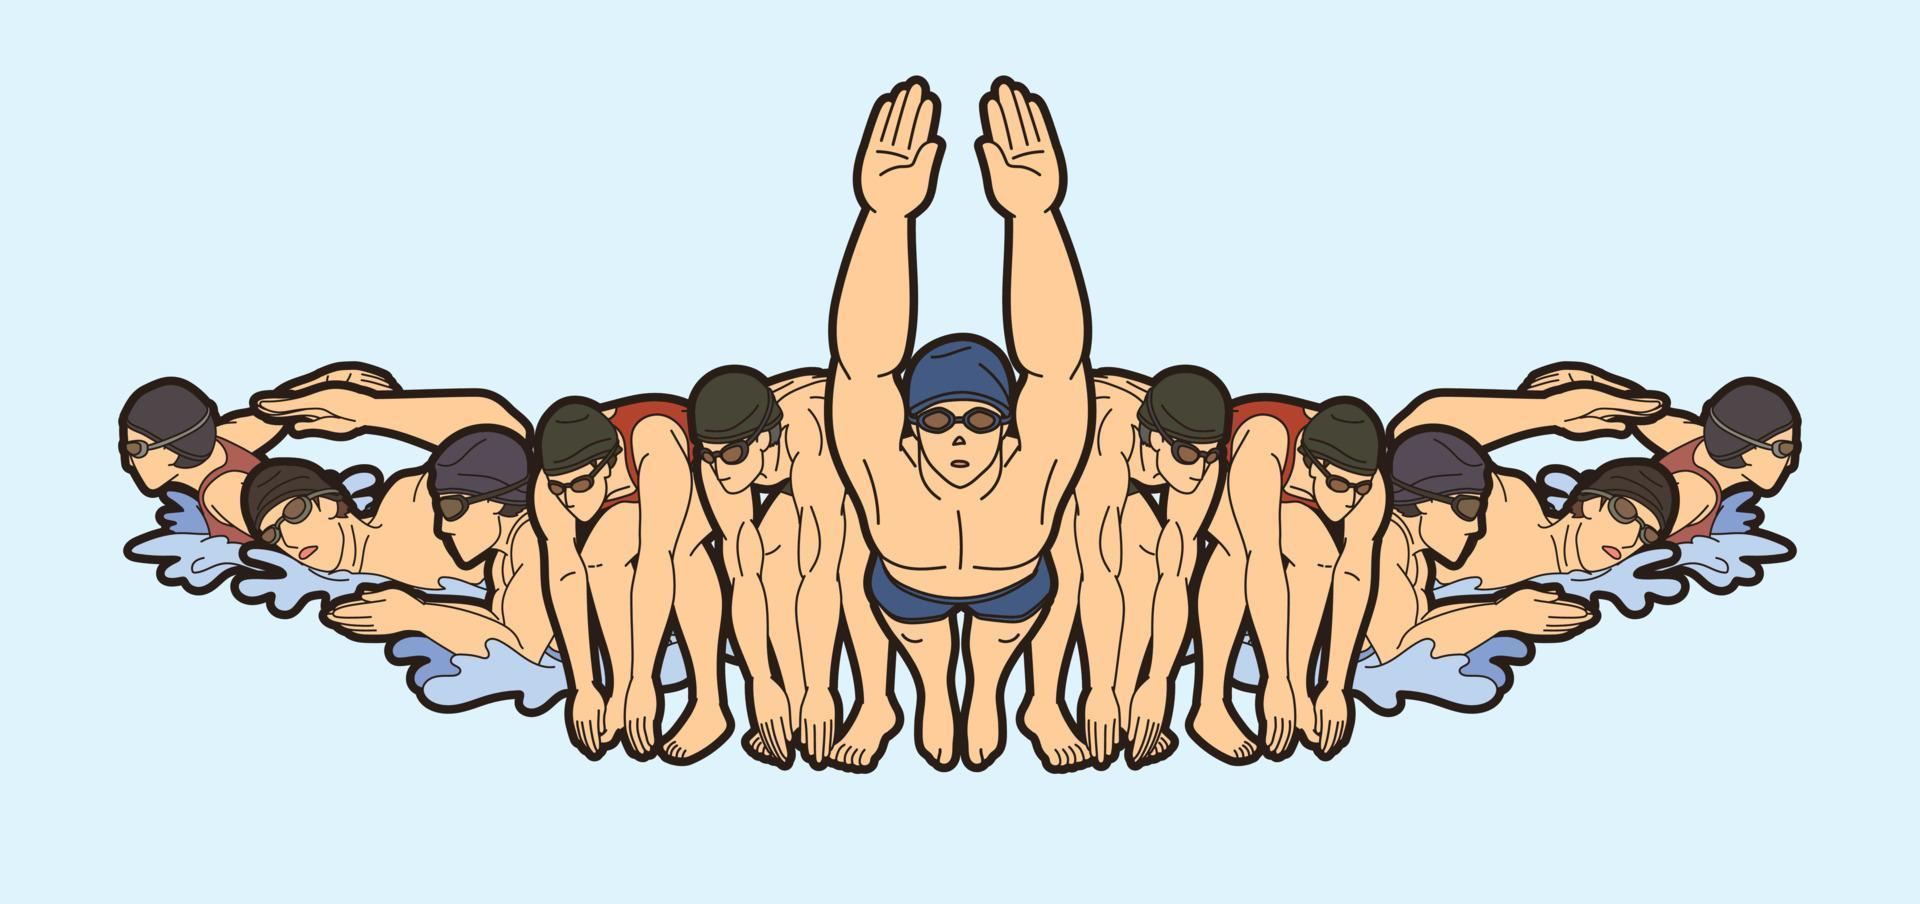 Group of People Swimming Action vector